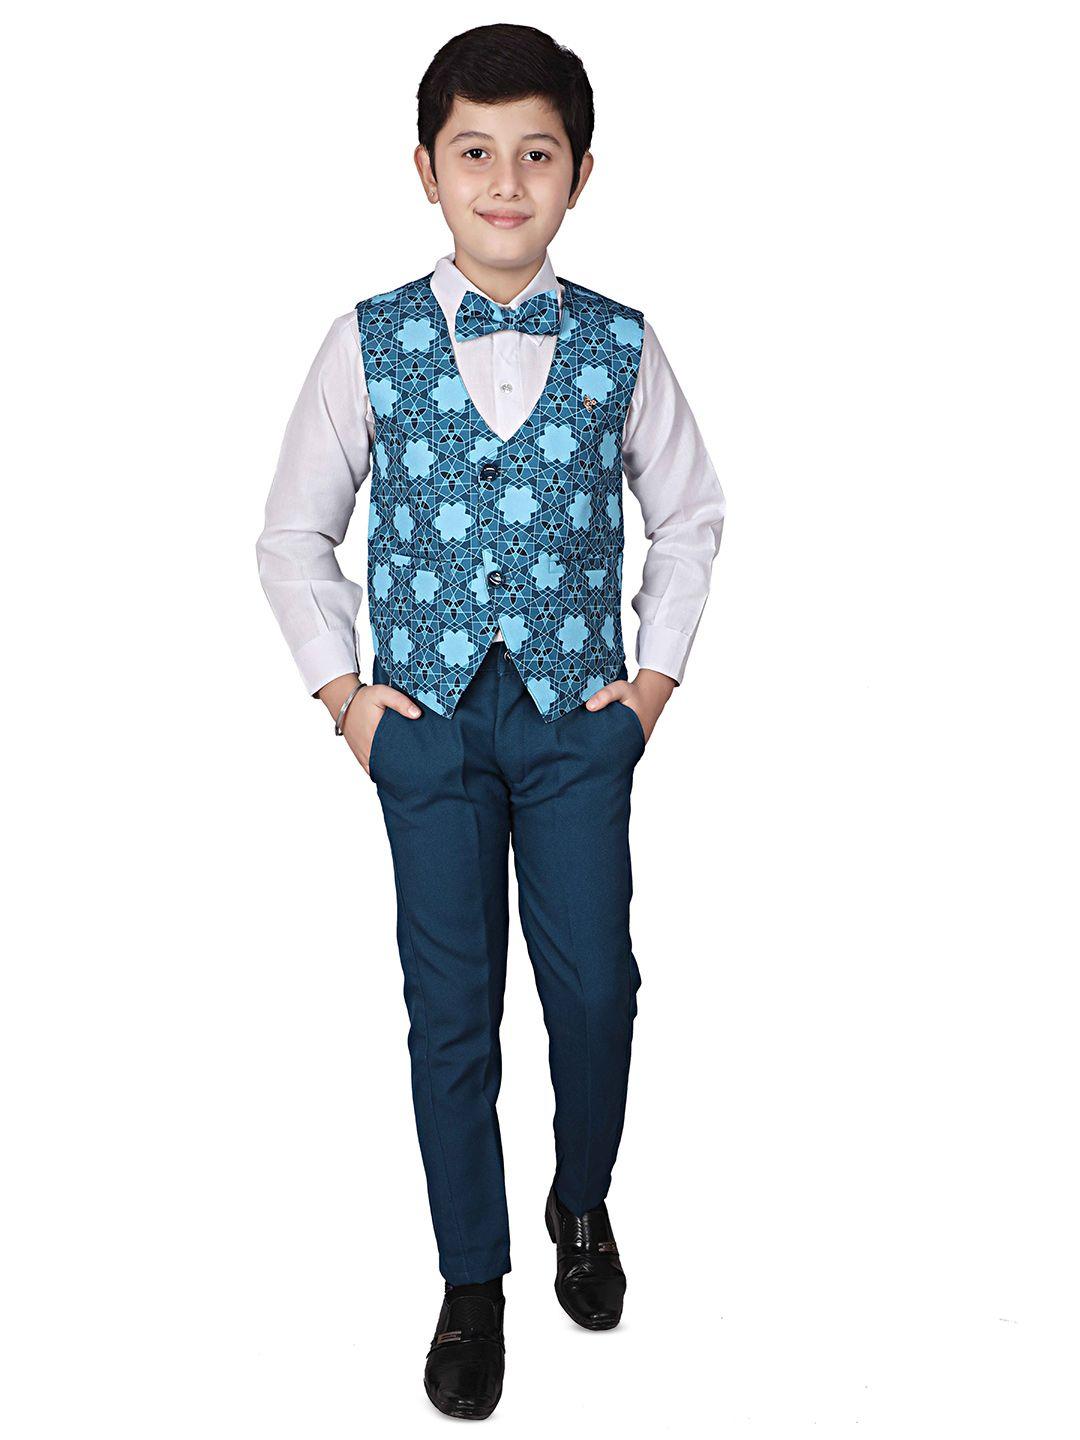 pro-ethic style developer boys pure cotton shirt & trousers with waistcoat & bow